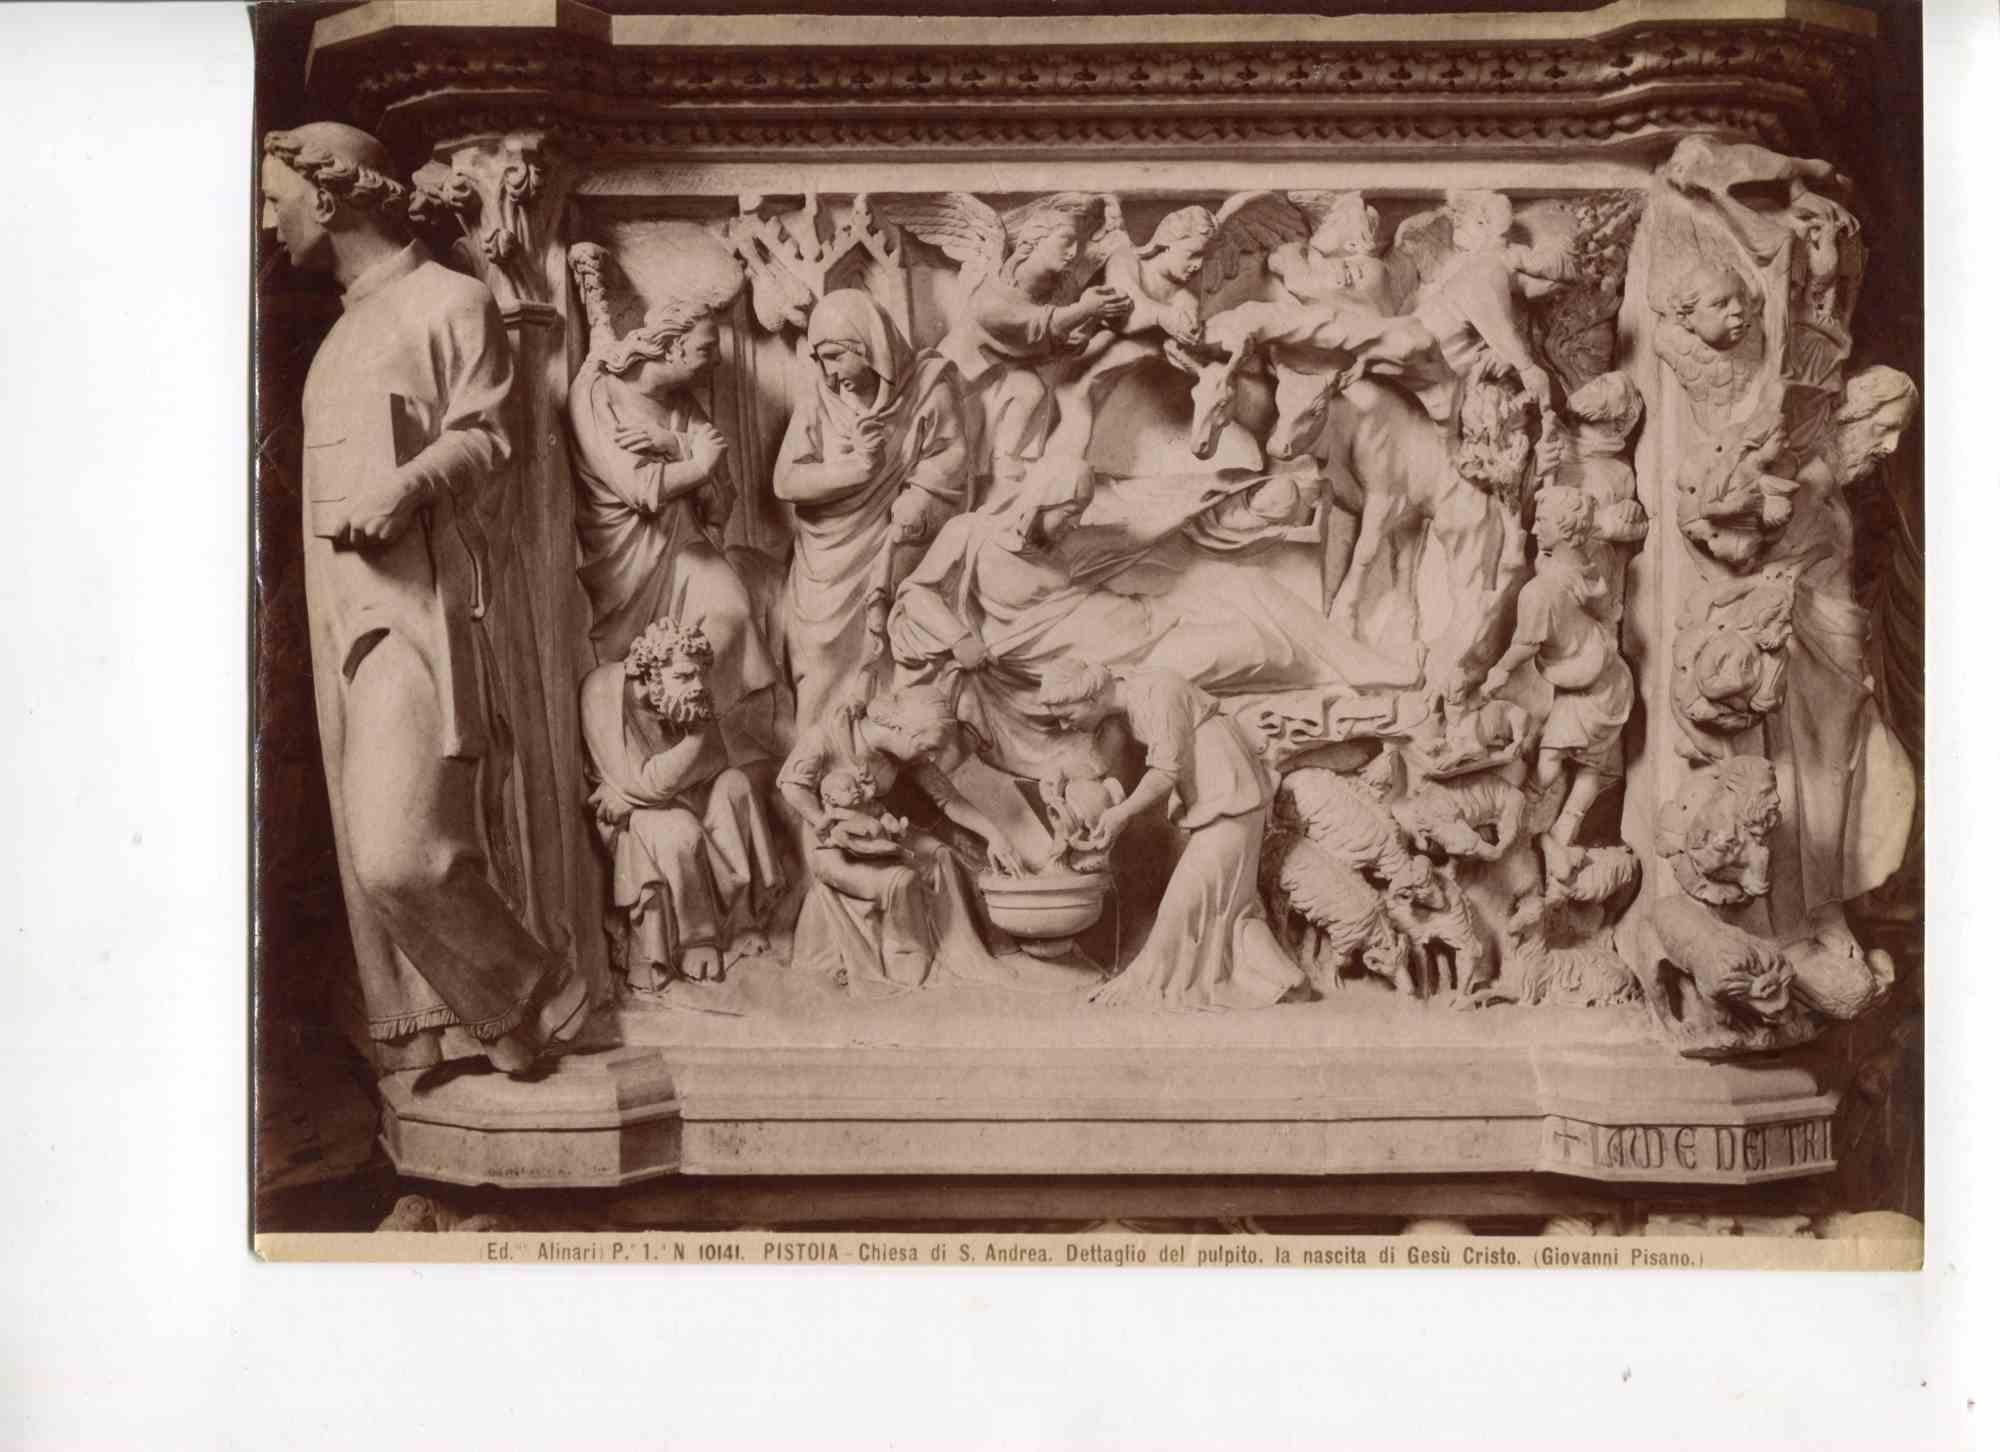 Unknown Black and White Photograph - The Birth of Jesus Christ, S. Andrea Church, Pistoia - Vintage Photo Early 1900